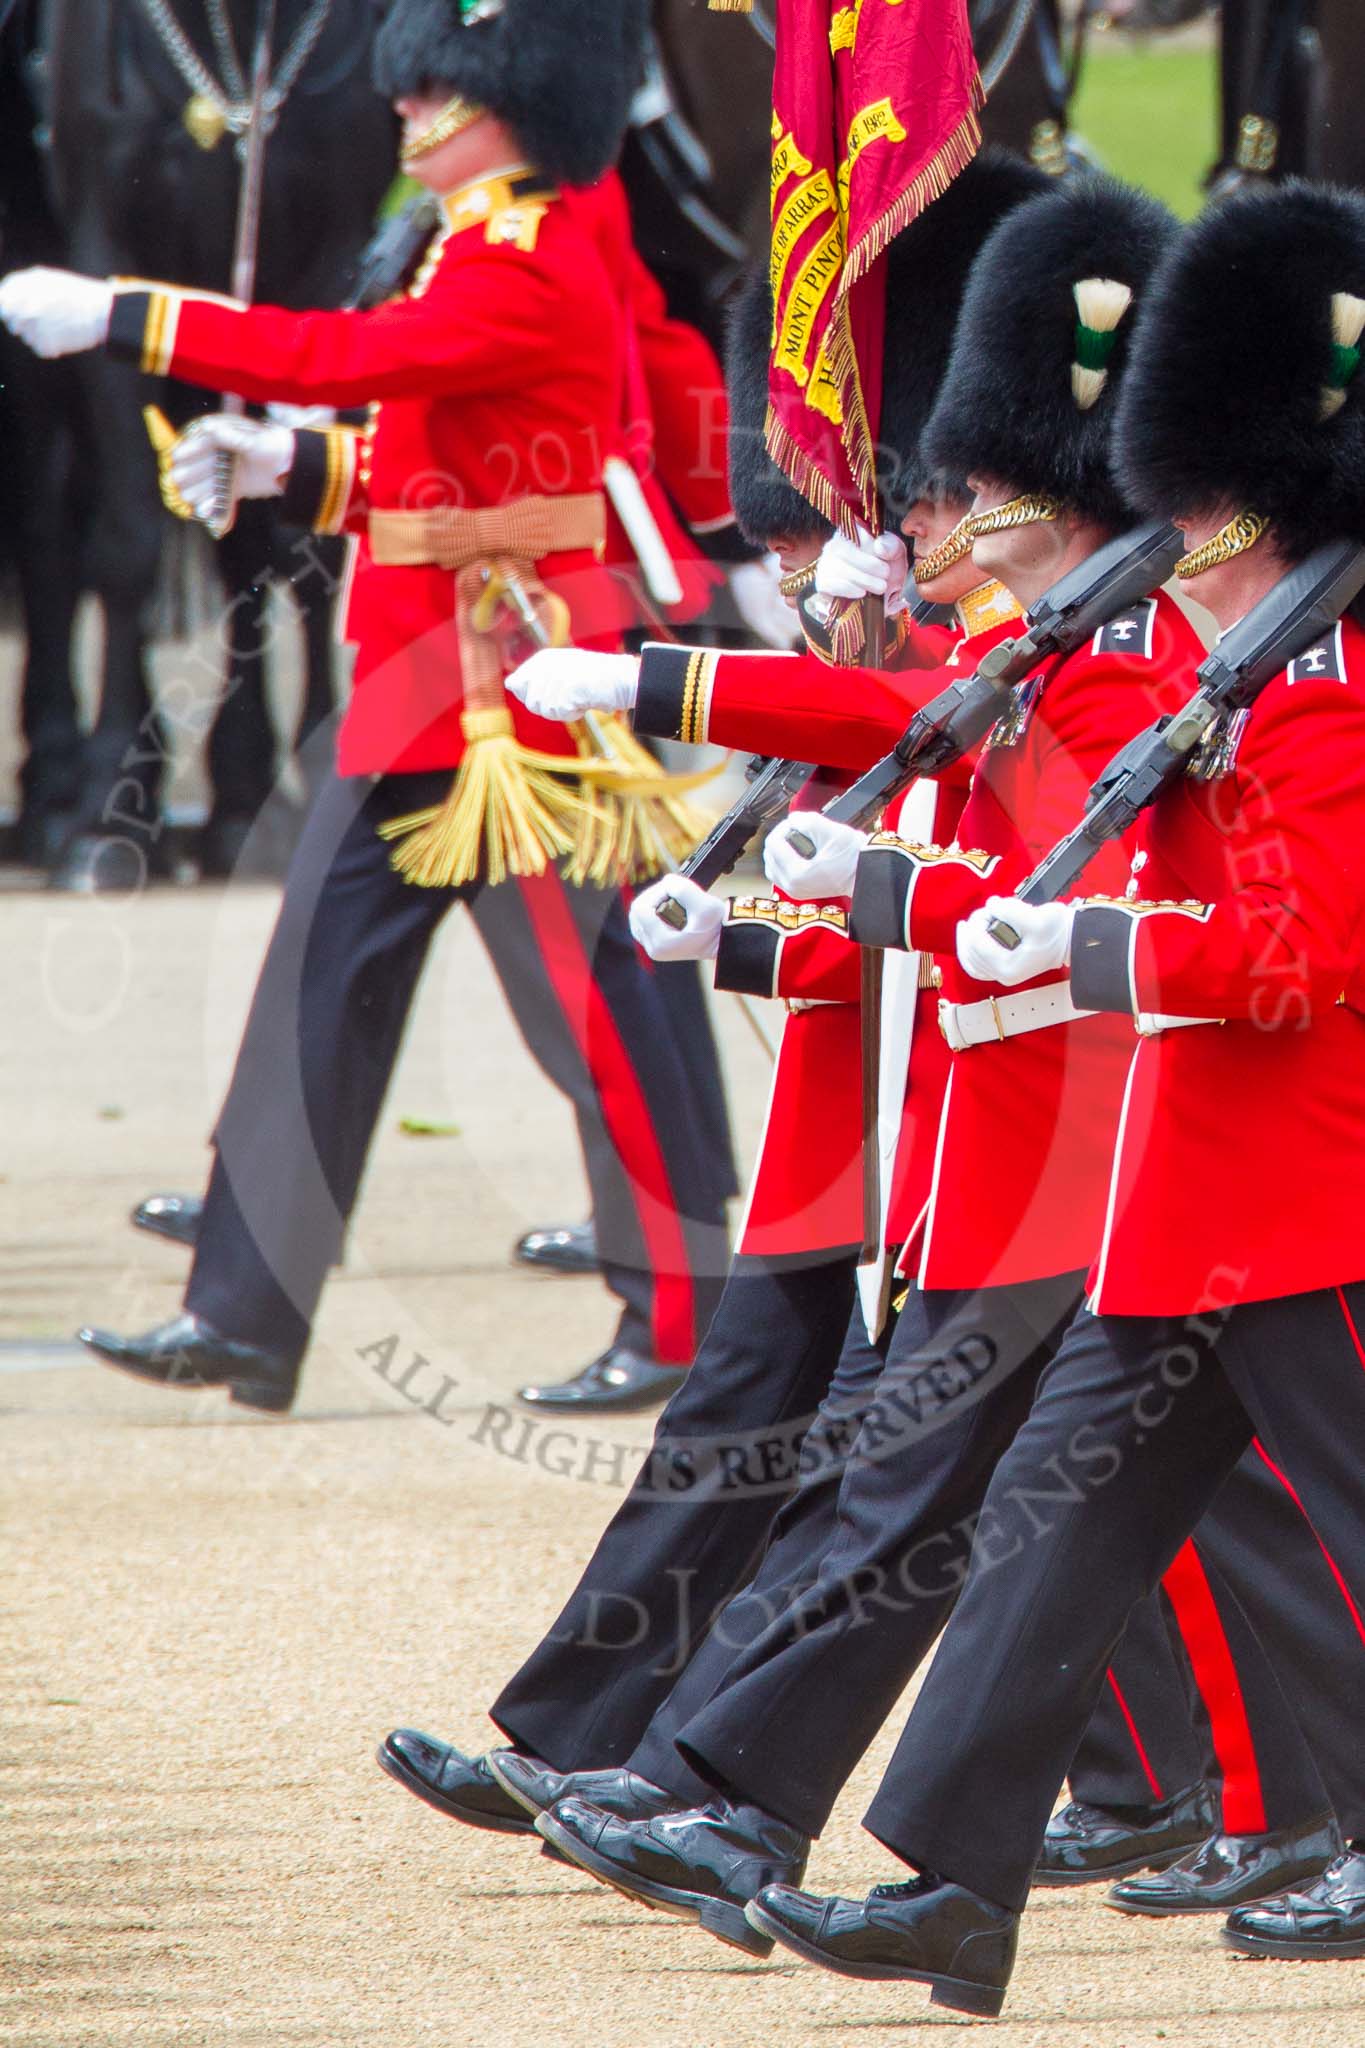 Trooping the Colour 2013: The Colour Party, carrying the Colour, during the March Past in Quick Time. Image #625, 15 June 2013 11:49 Horse Guards Parade, London, UK